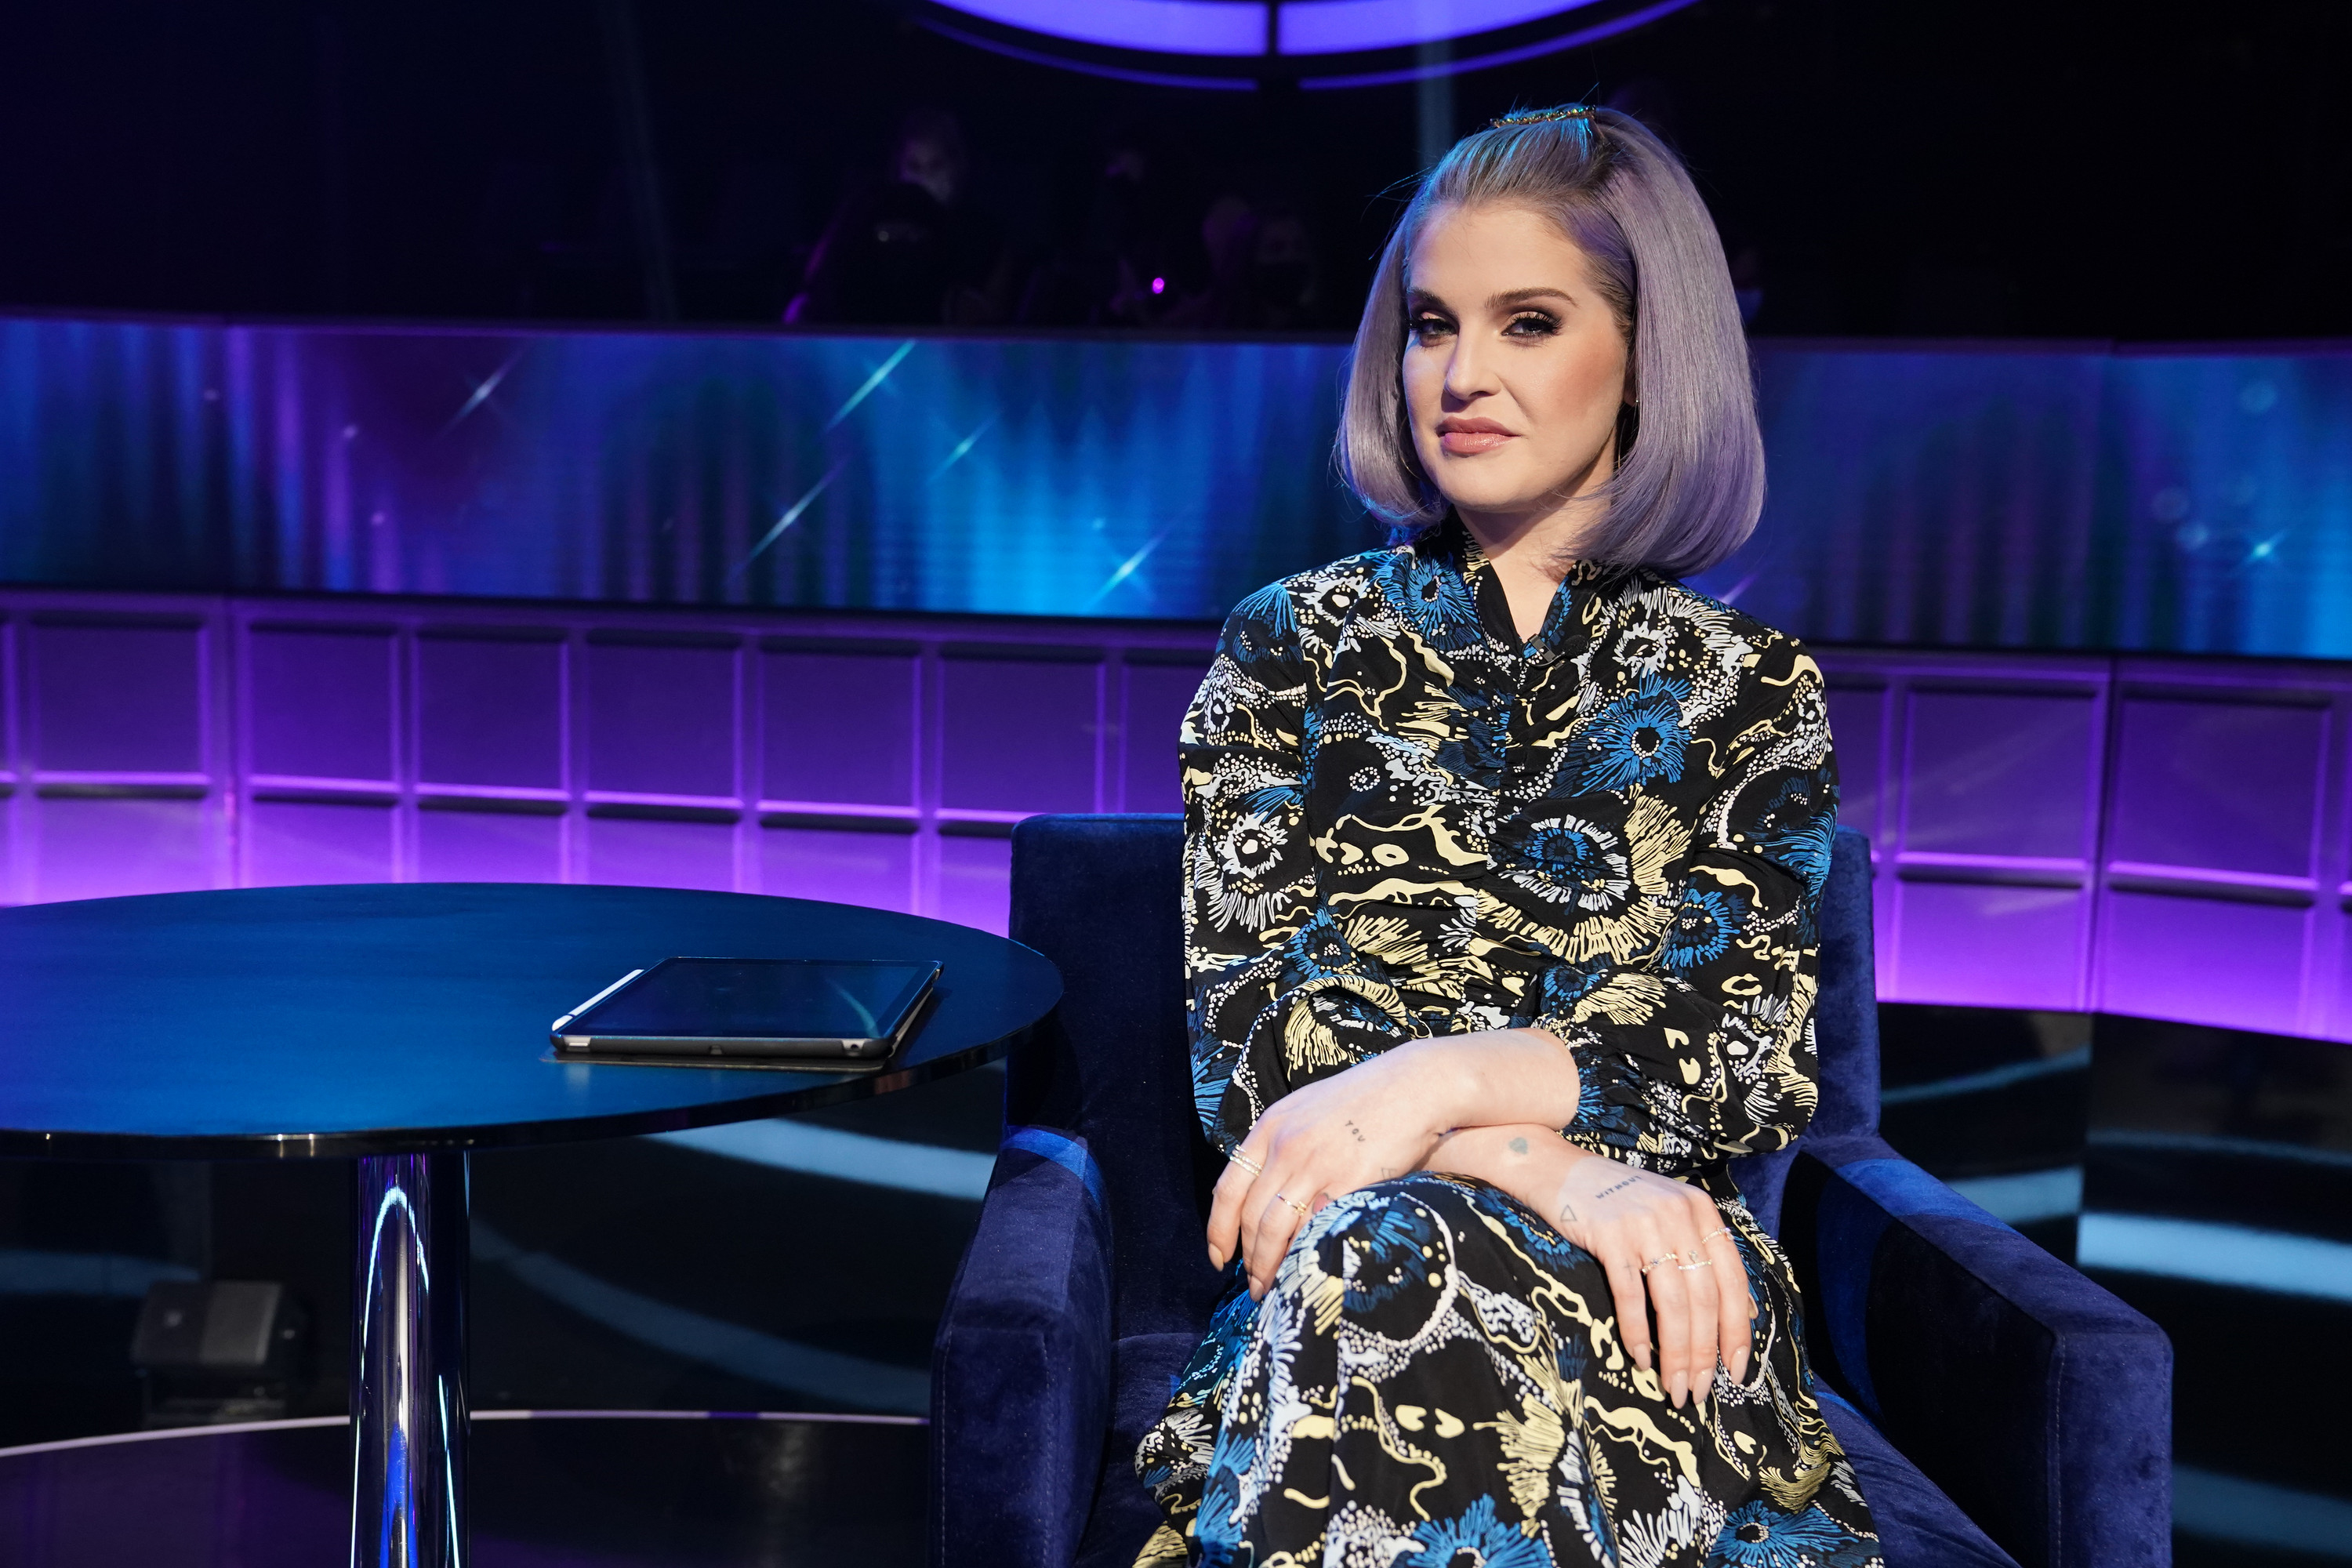 Kelly Osbourne seated on a TV show set, wearing a paisley-patterned outfit, styled hair